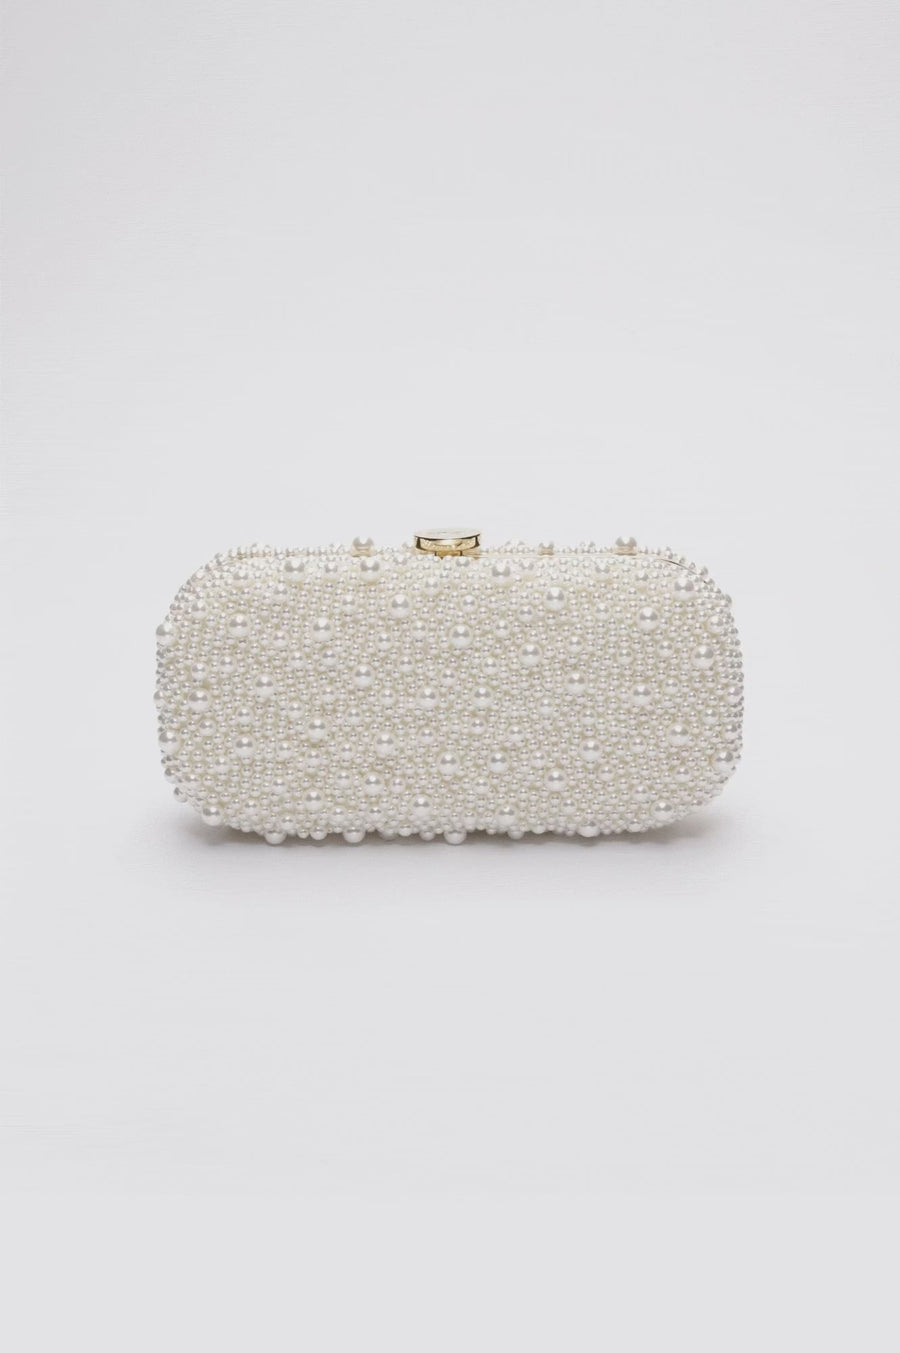 360 vide of the True Love Pearl Clutch with hand-sewn pearls with a gold hardware frame.